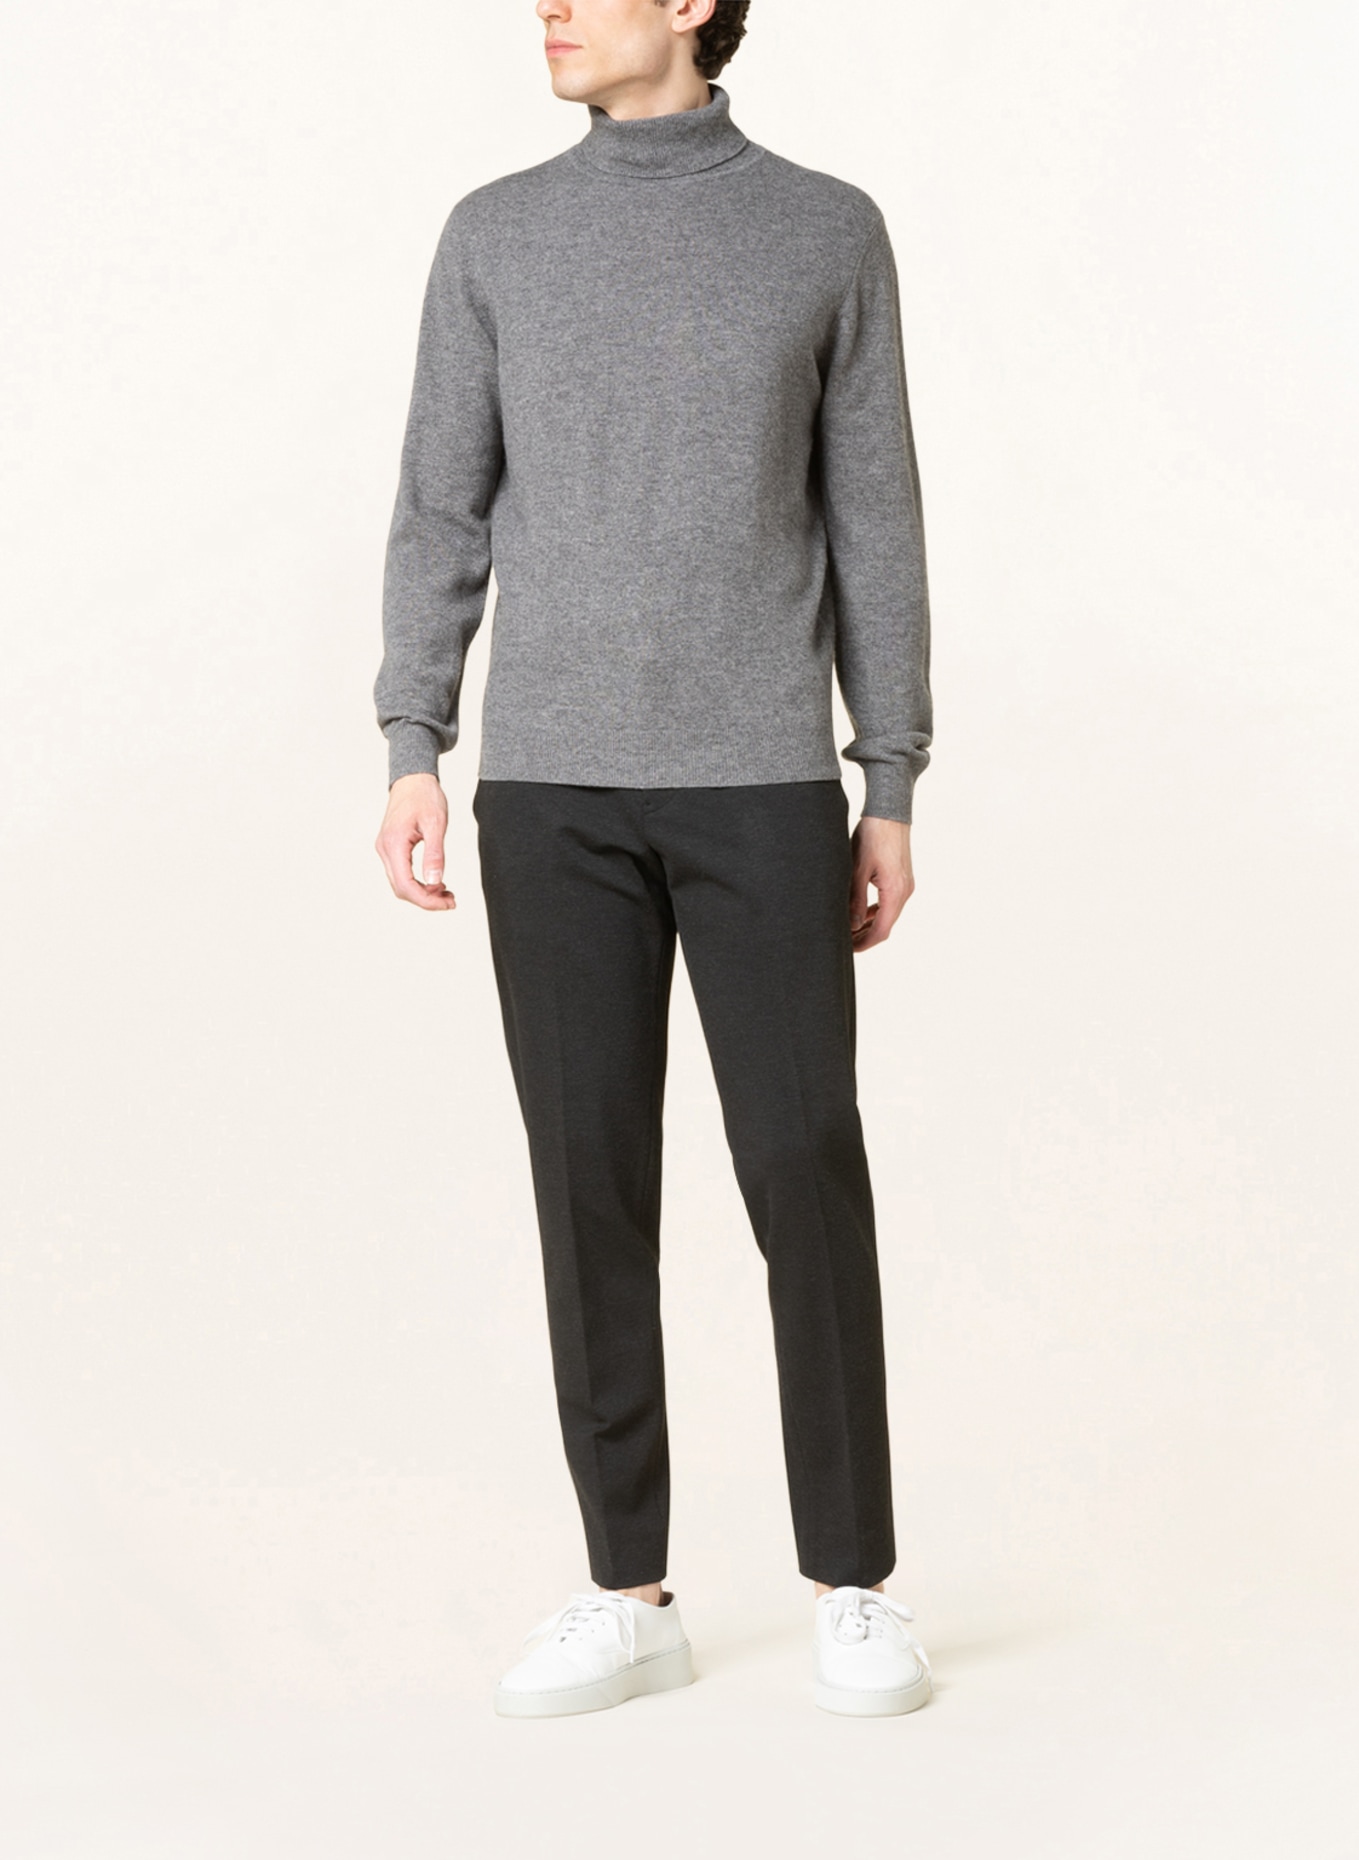 STROKESMAN'S Turtleneck sweater in cashmere, Color: GRAY (Image 2)